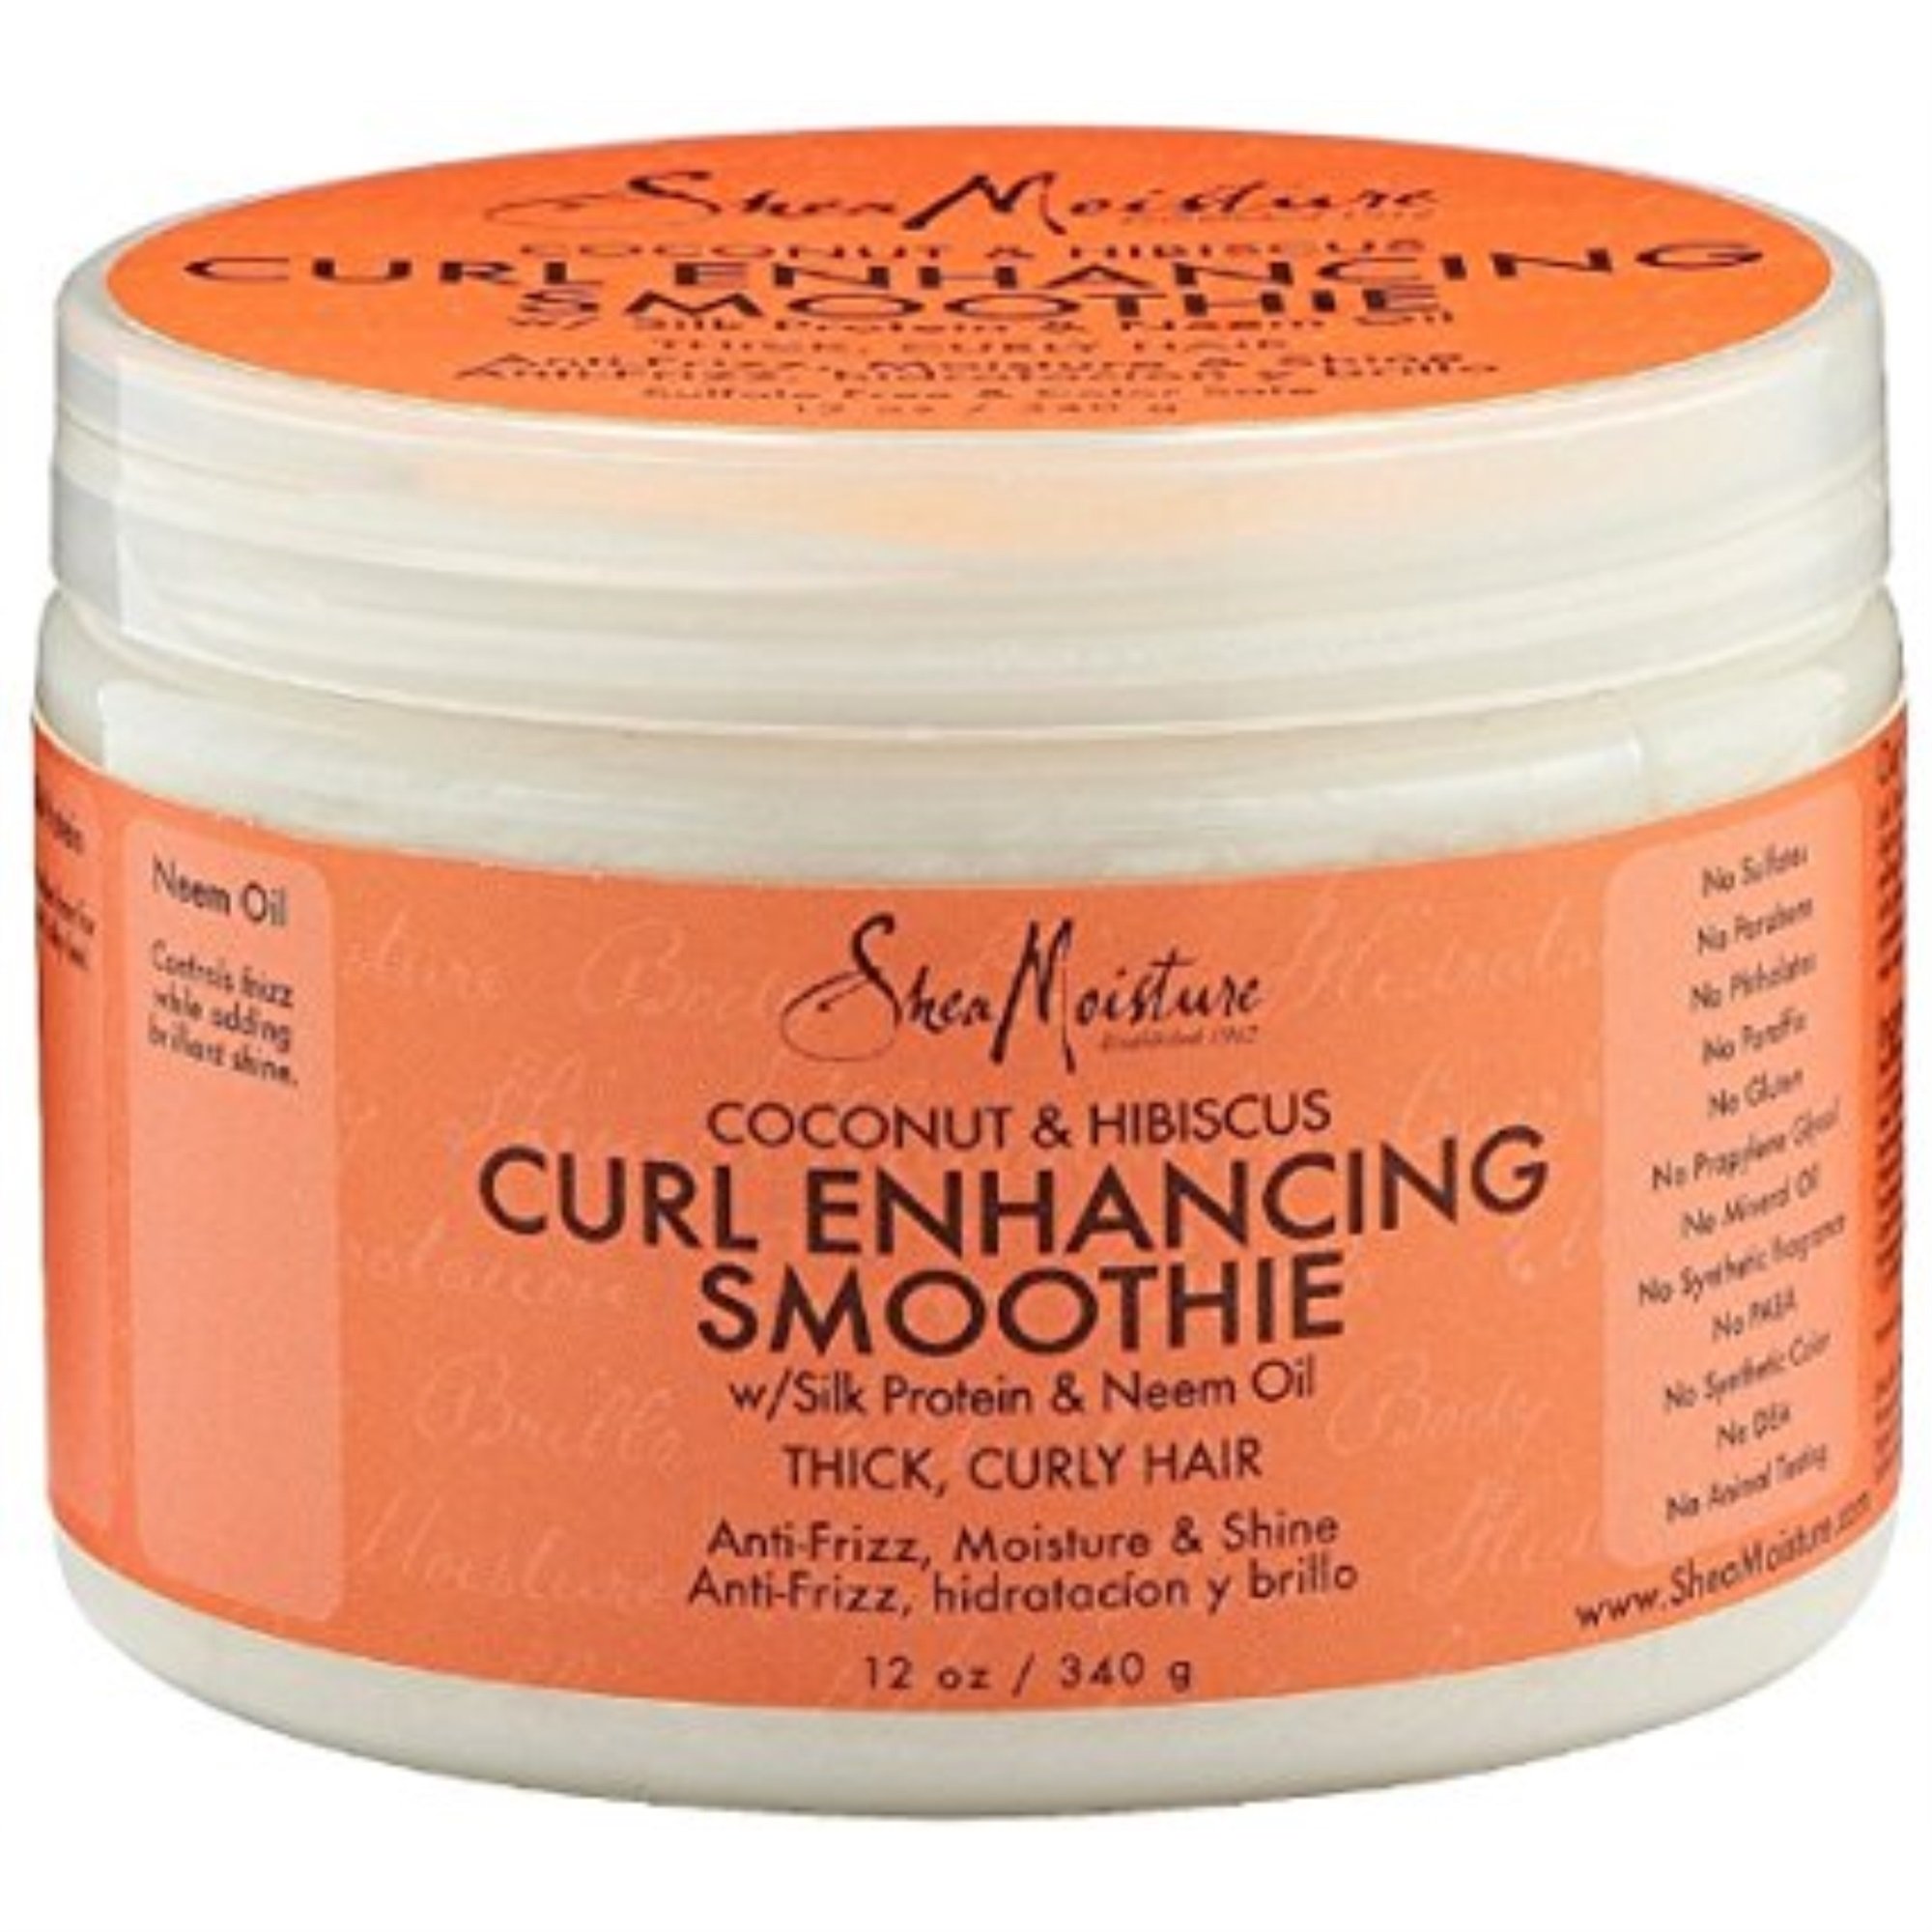 Shea Moisture Coconut and Hibiscus Curl Enhancing Smoothie (12oz)